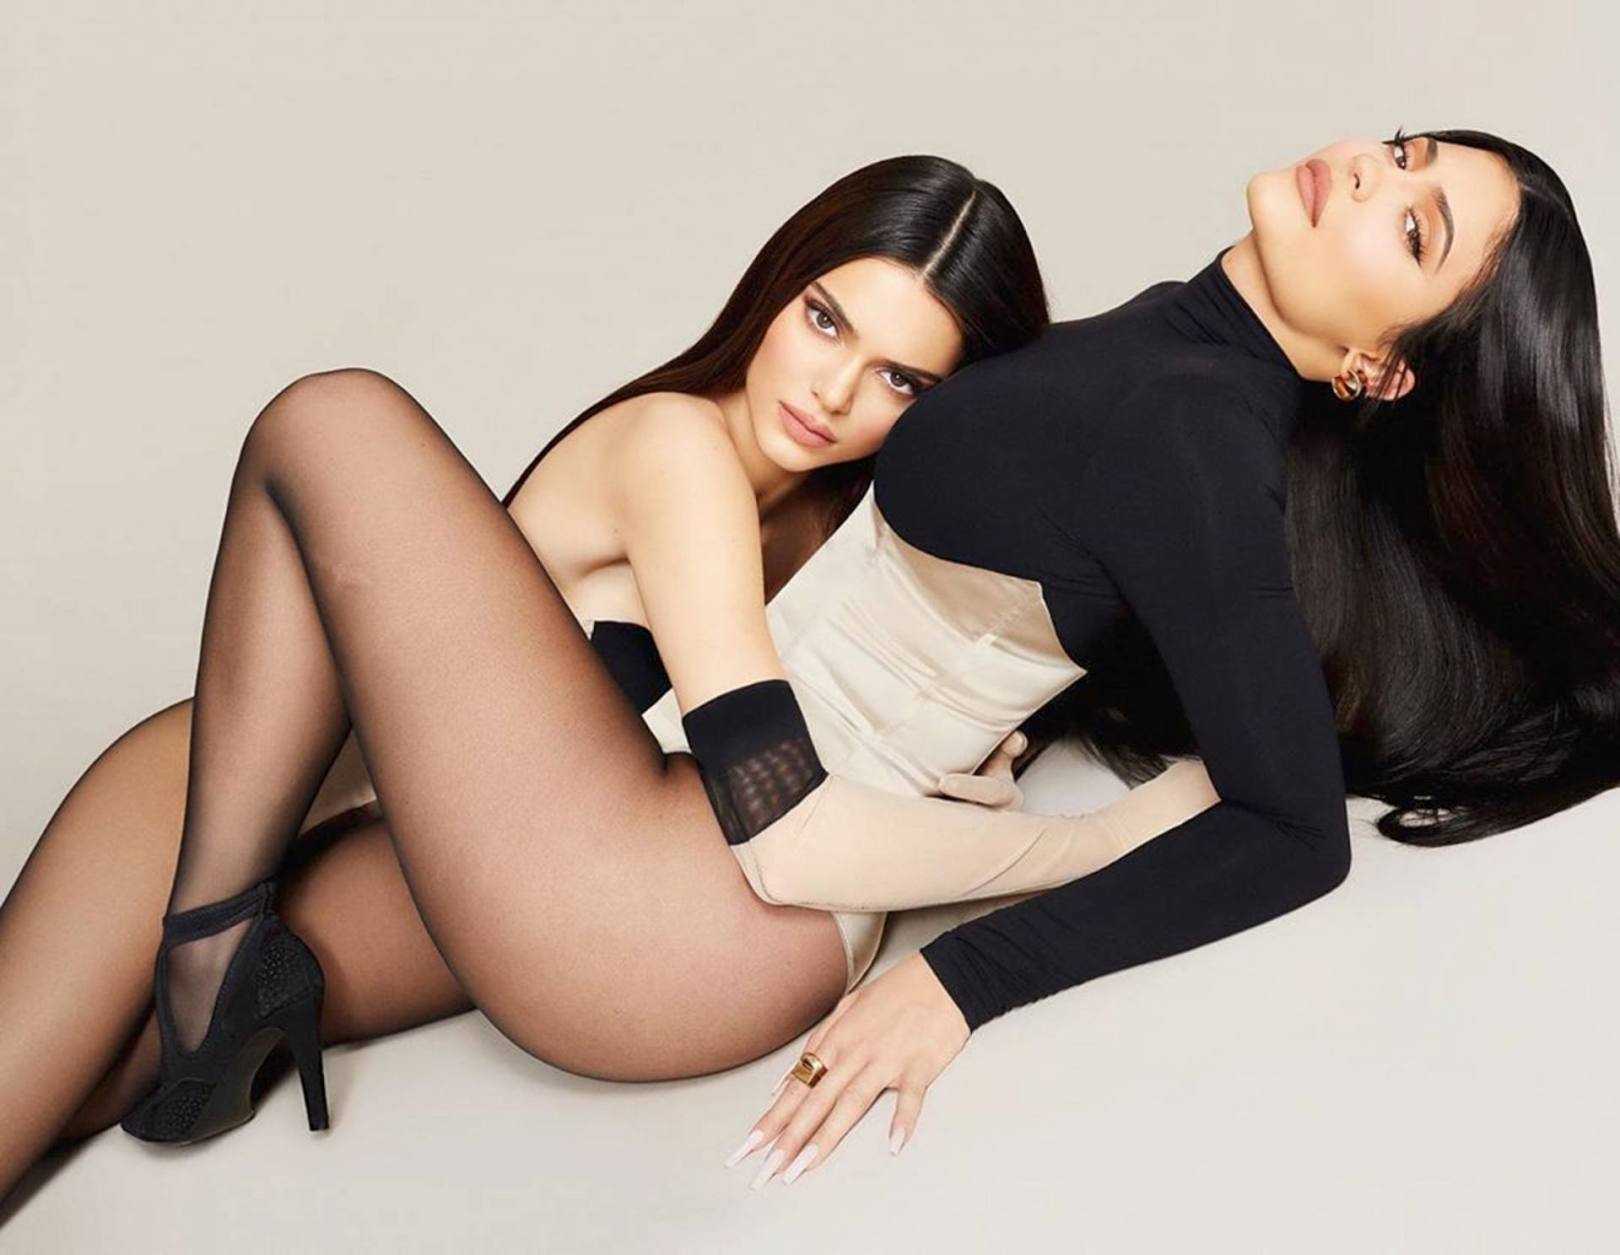 Kendall X Kylie Cosmetics 2020 campaign photos